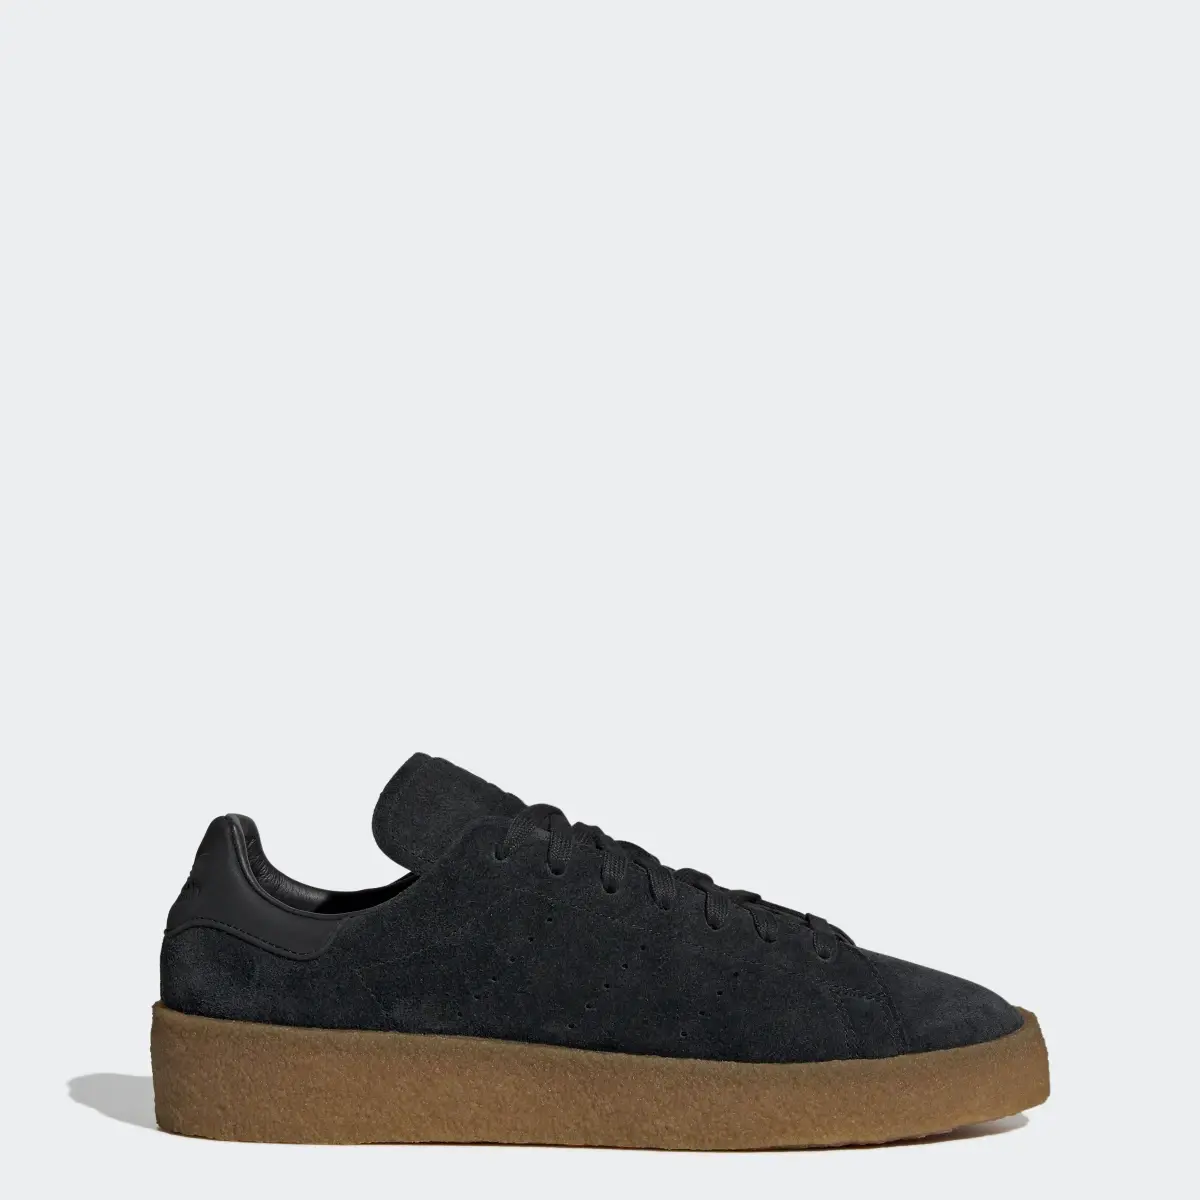 Adidas Stan Smith Crepe Shoes. 1